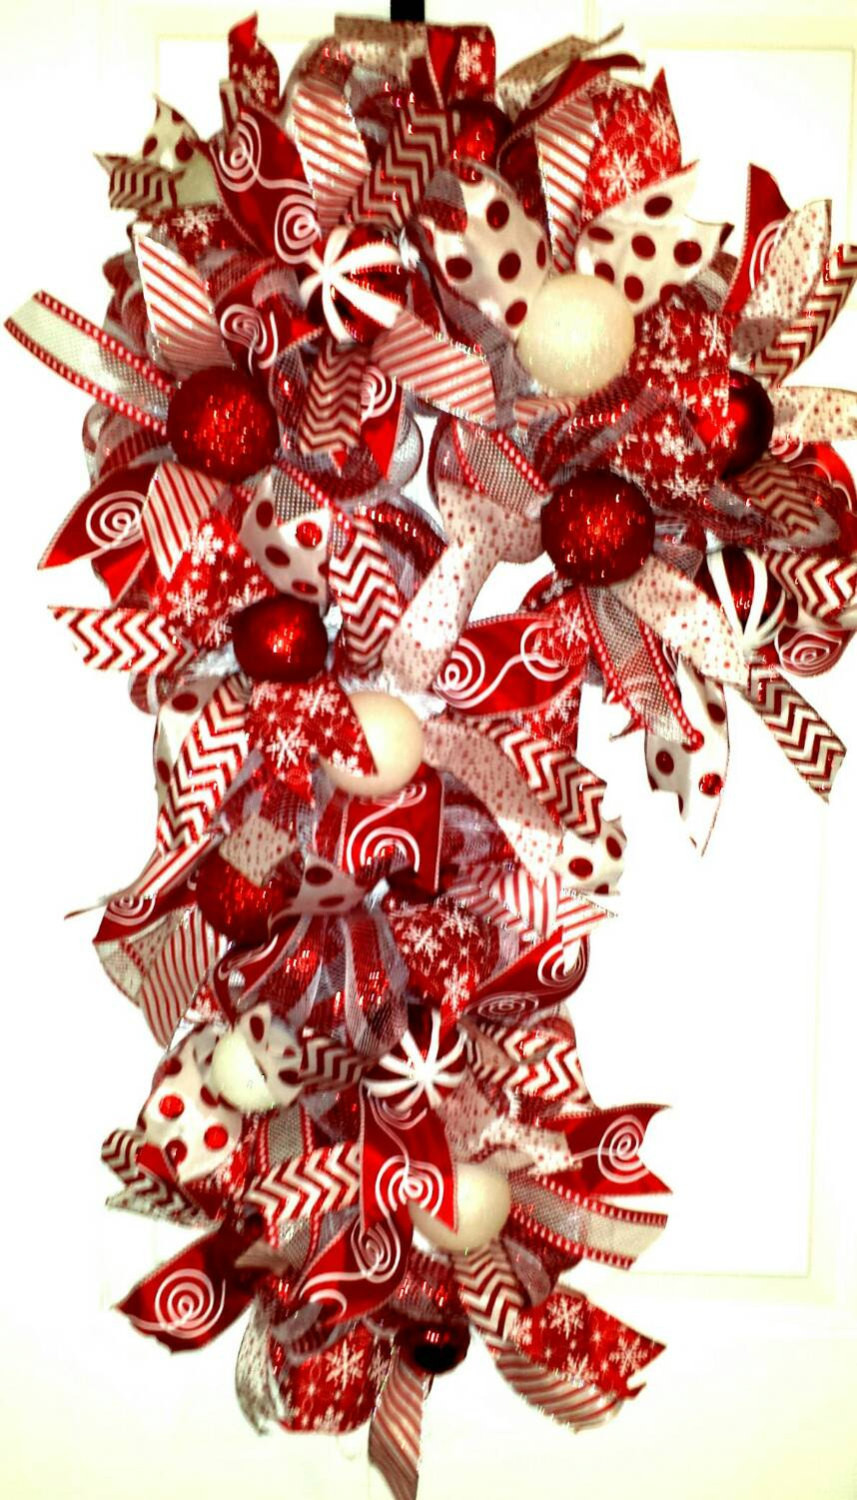 Candy Cane Christmas Wreath
 Candy Cane Candy Cane Wreath Candy Cane Door Wreath